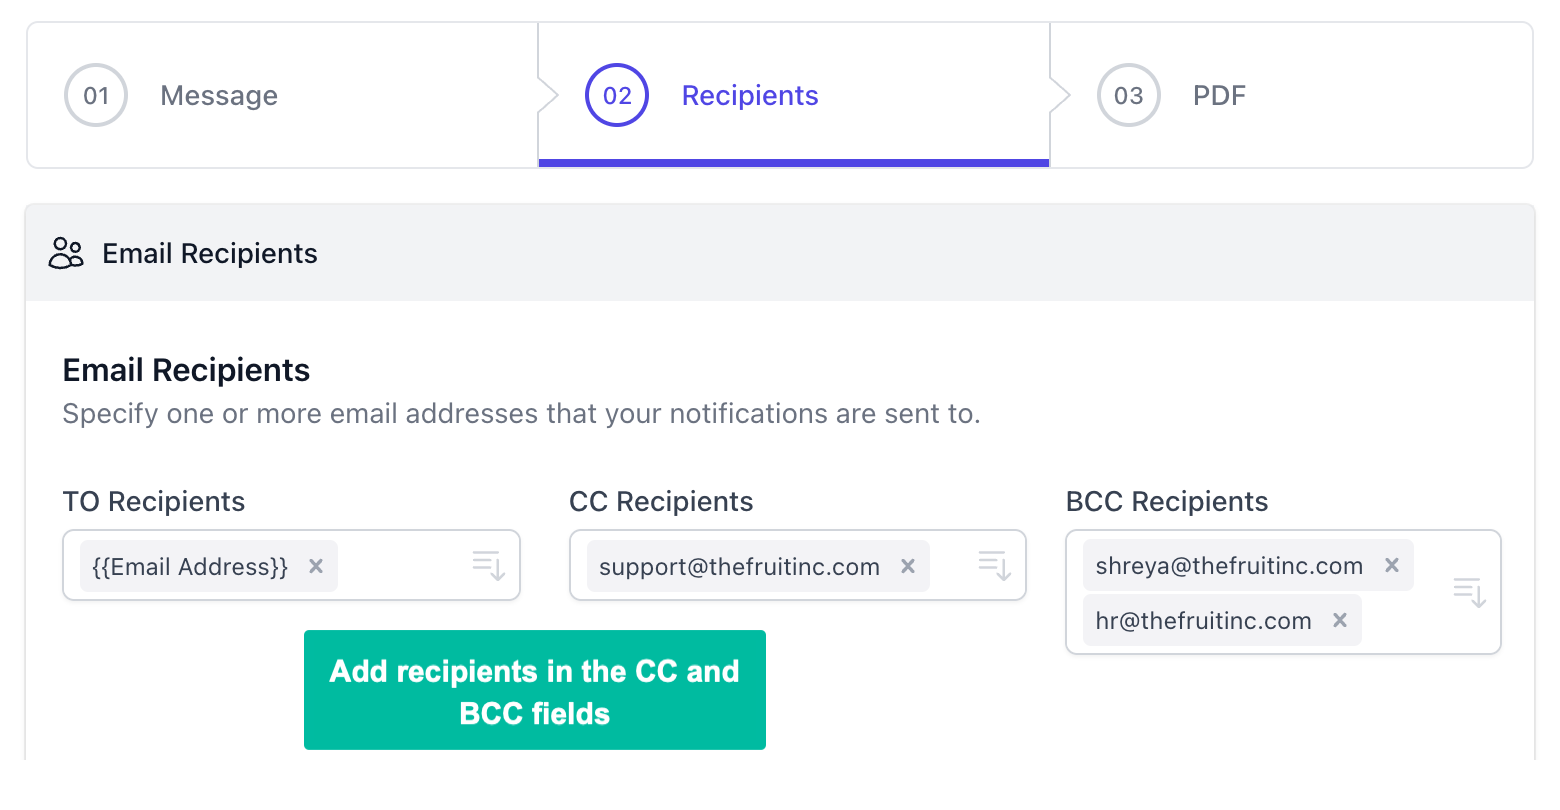 CC and BCC Emails